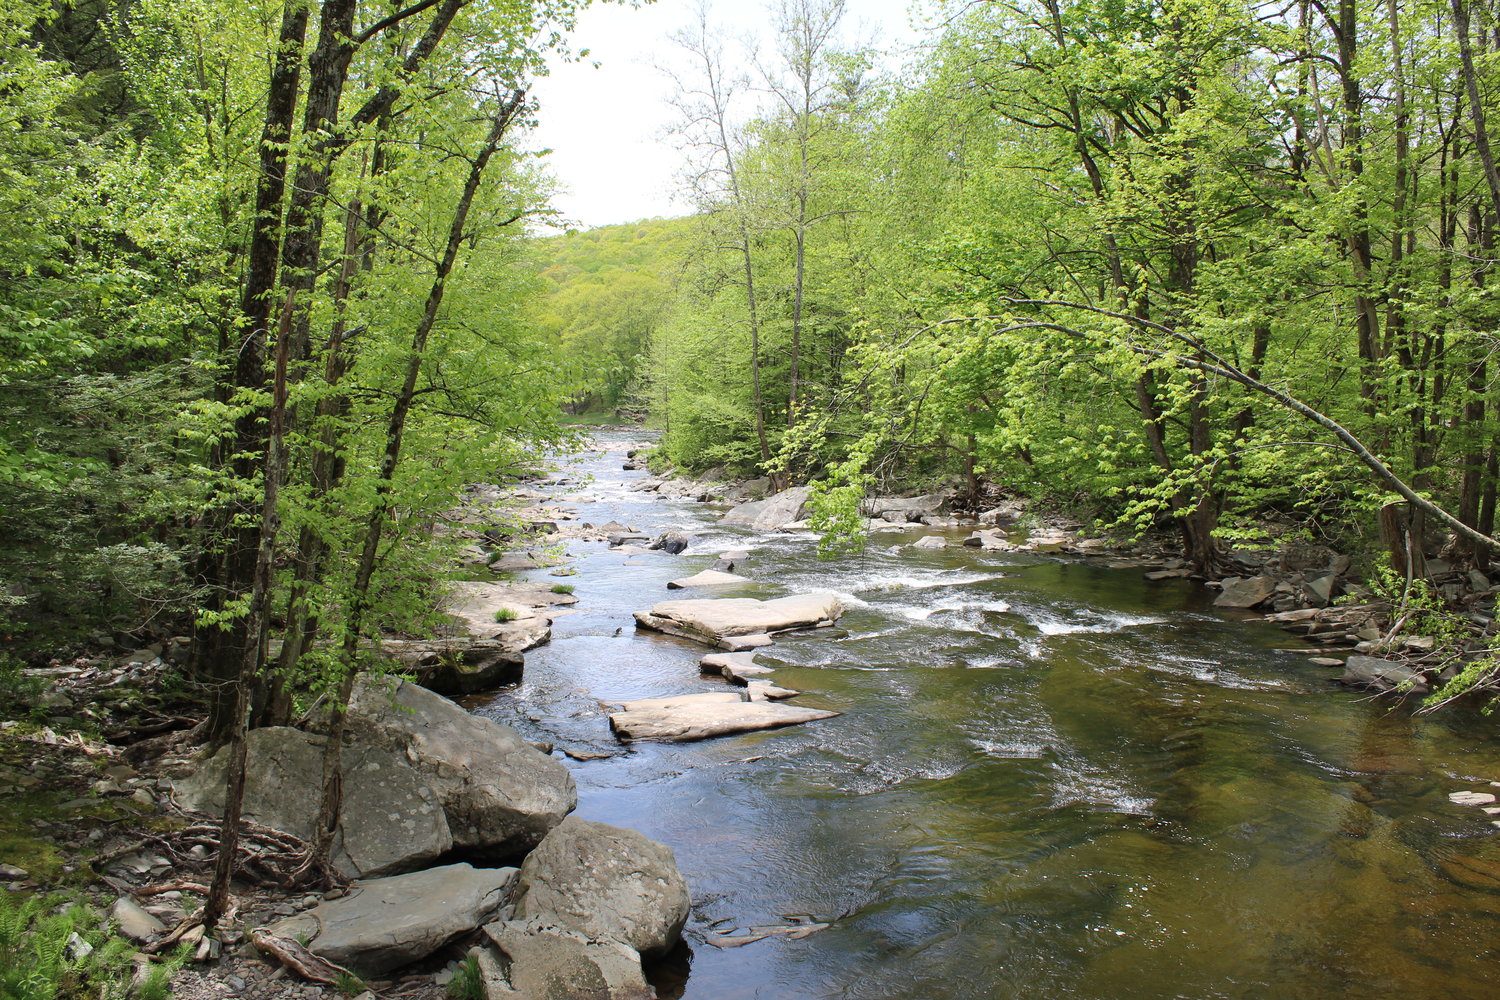 The Ten Mile River still weaves its way through forest, passing the remnants of 19th-century settlements, and heading for the Delaware.